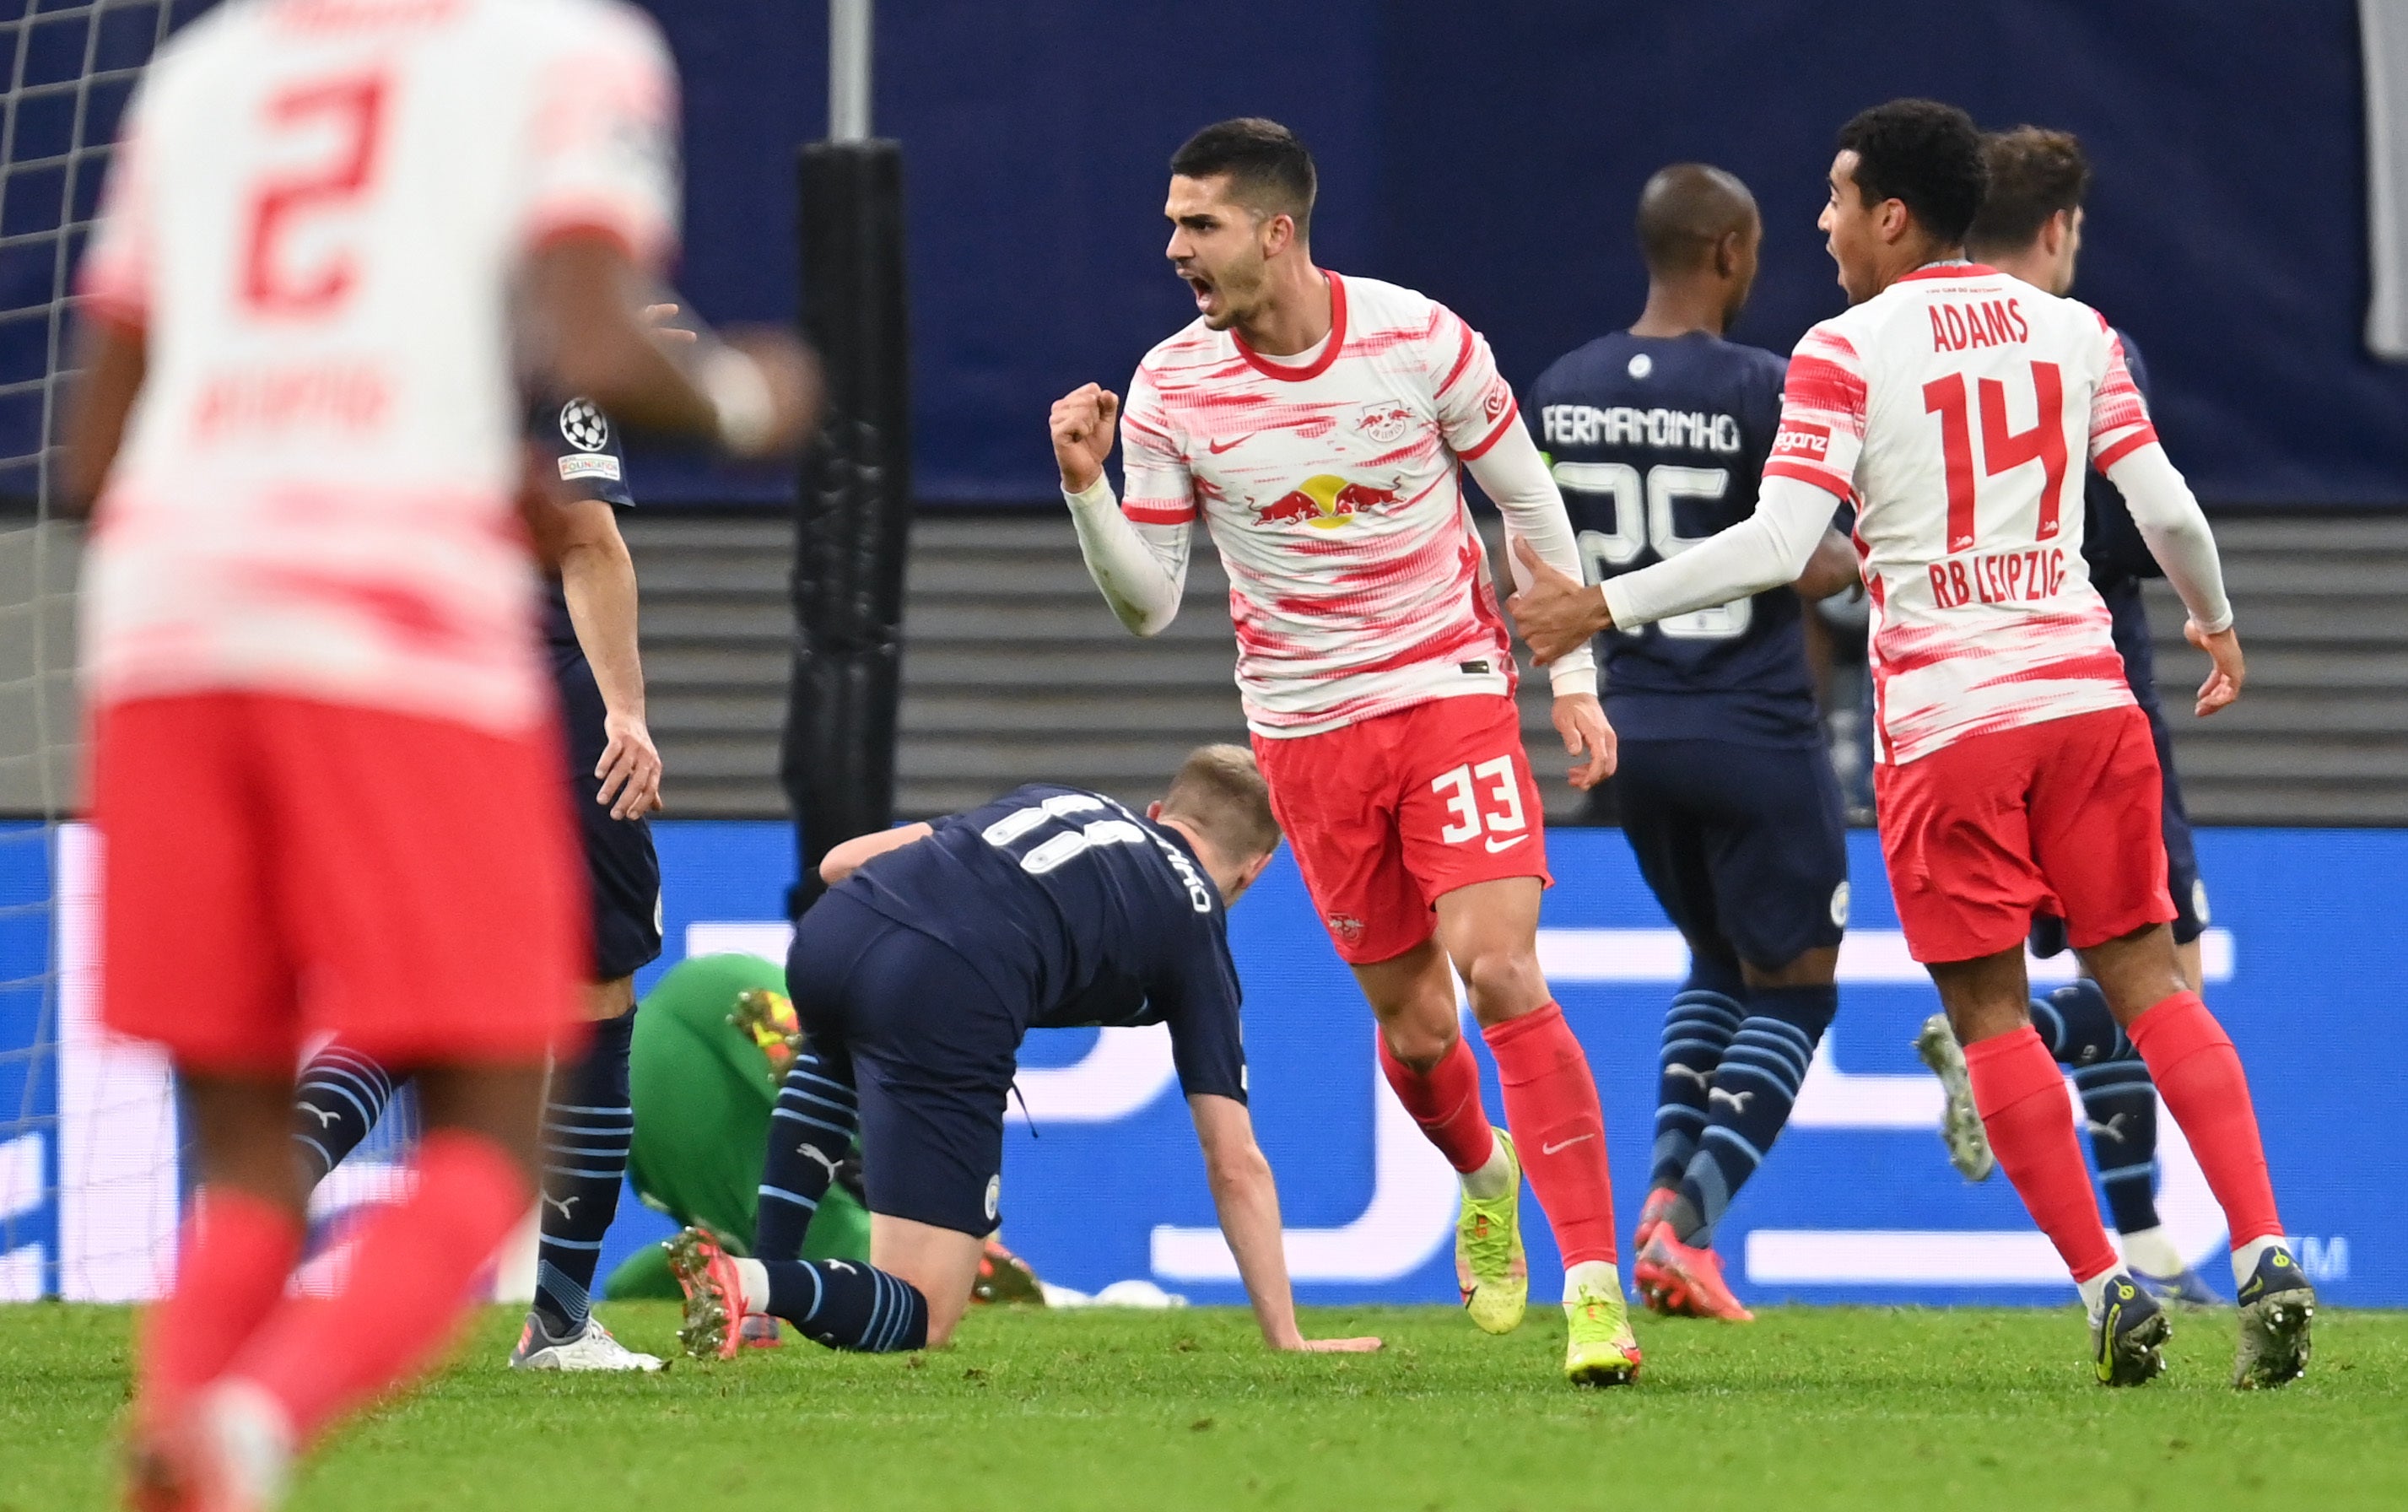 Leipzig put aside recent problems to claim a notable win (DPA via PA Wire)